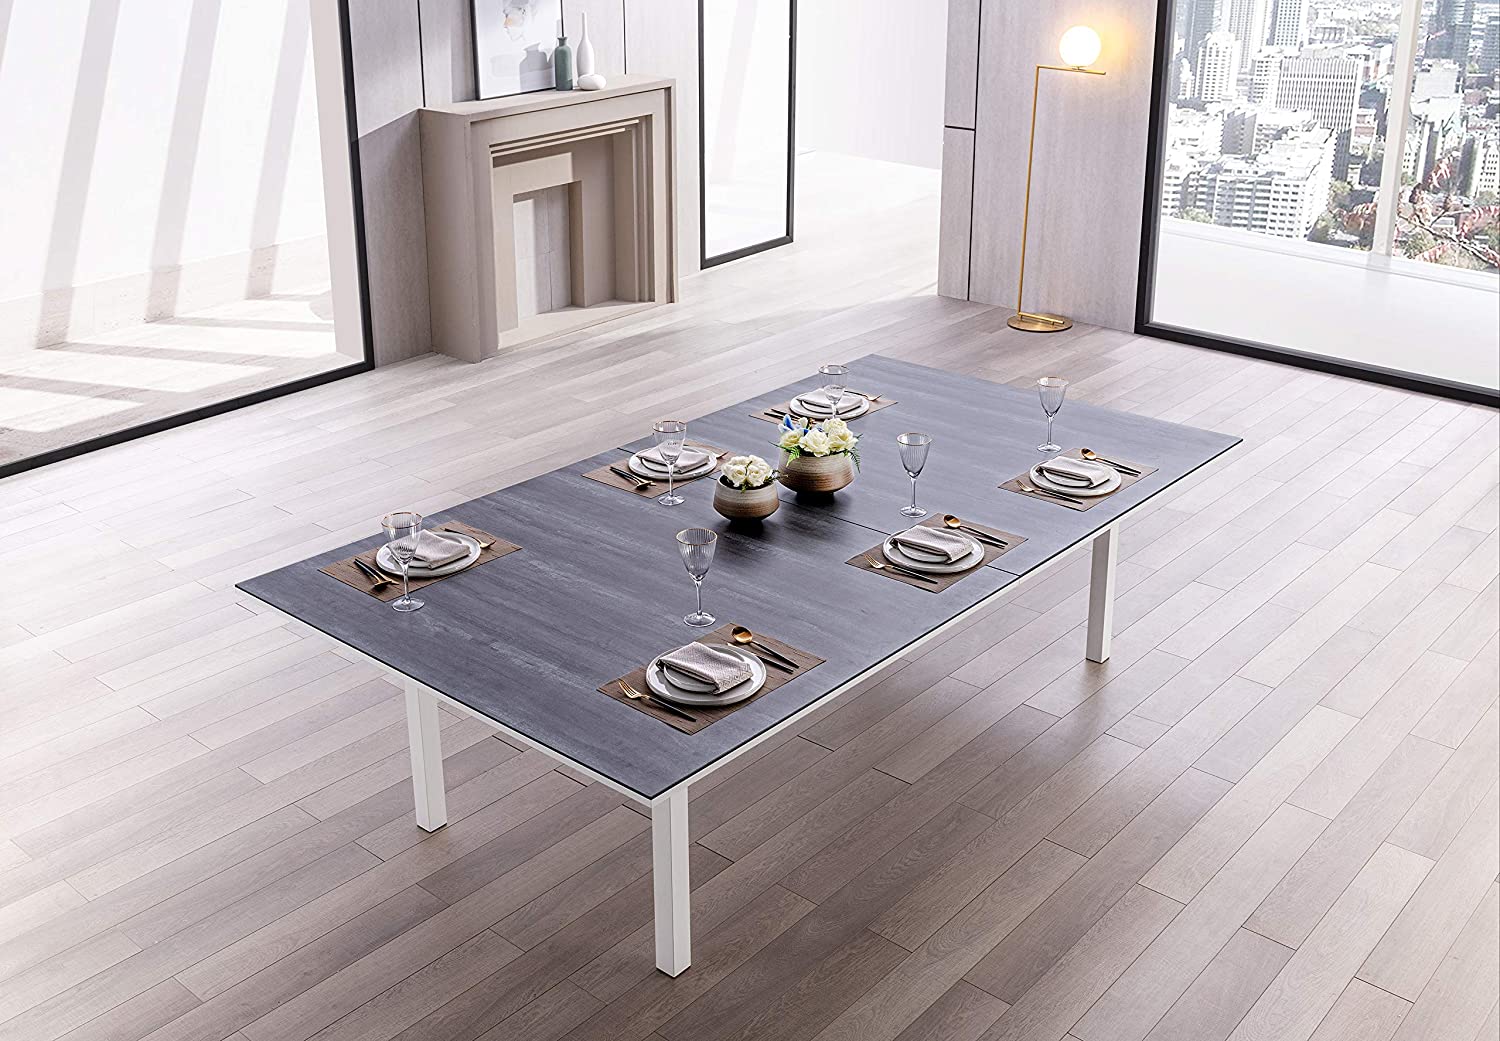 B085M2H786 White Line Imports Tiana Tennis Game/Dining/Conference Table in Ceramic Glass Top, Grey Metal Legs and Matte Black Feet